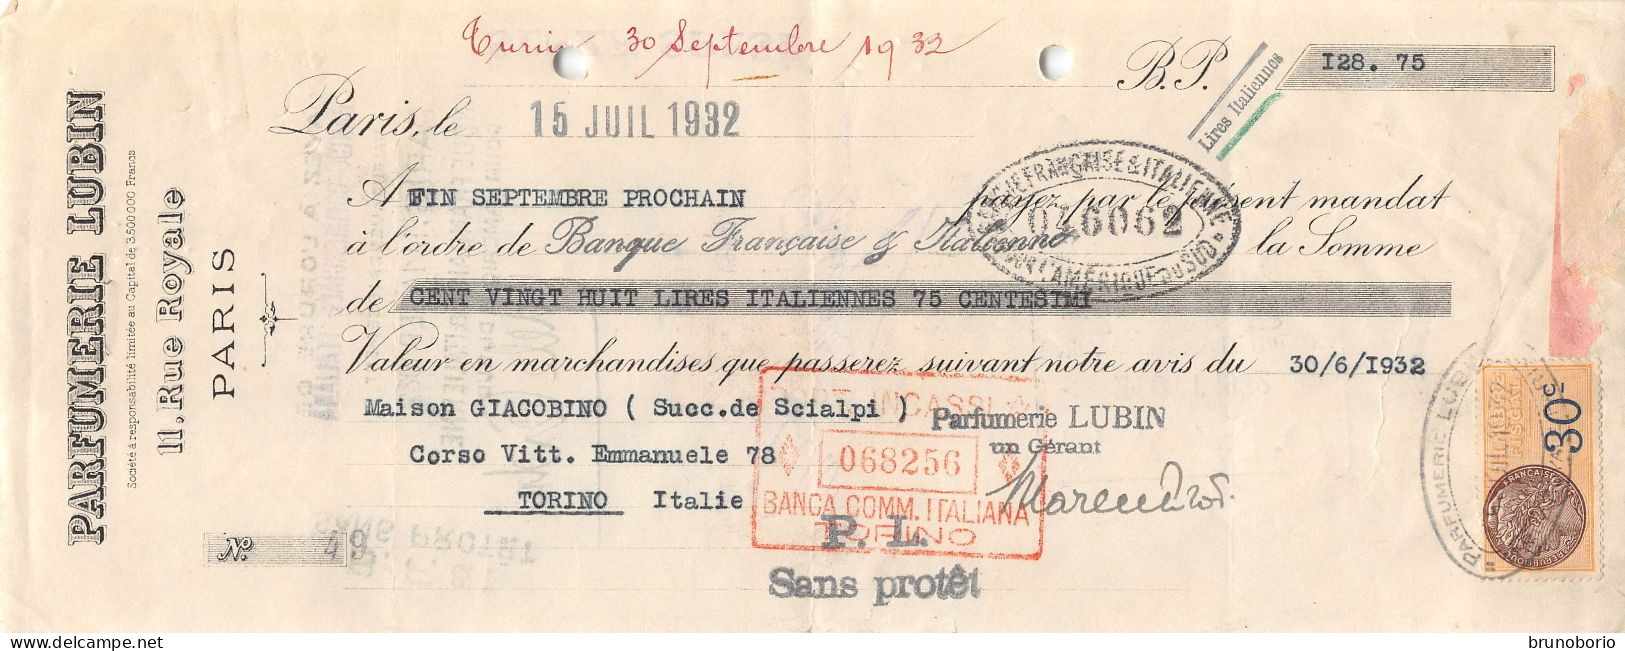 00158 "PARFUMERIE LUBIN- PARIS  - DITTA GIACOBINO -TORINO . CAMBIALE NR 49 - 15 JUIL 1932-BANCA COMMERCIALE"  CAMB. ORIG - Wissels